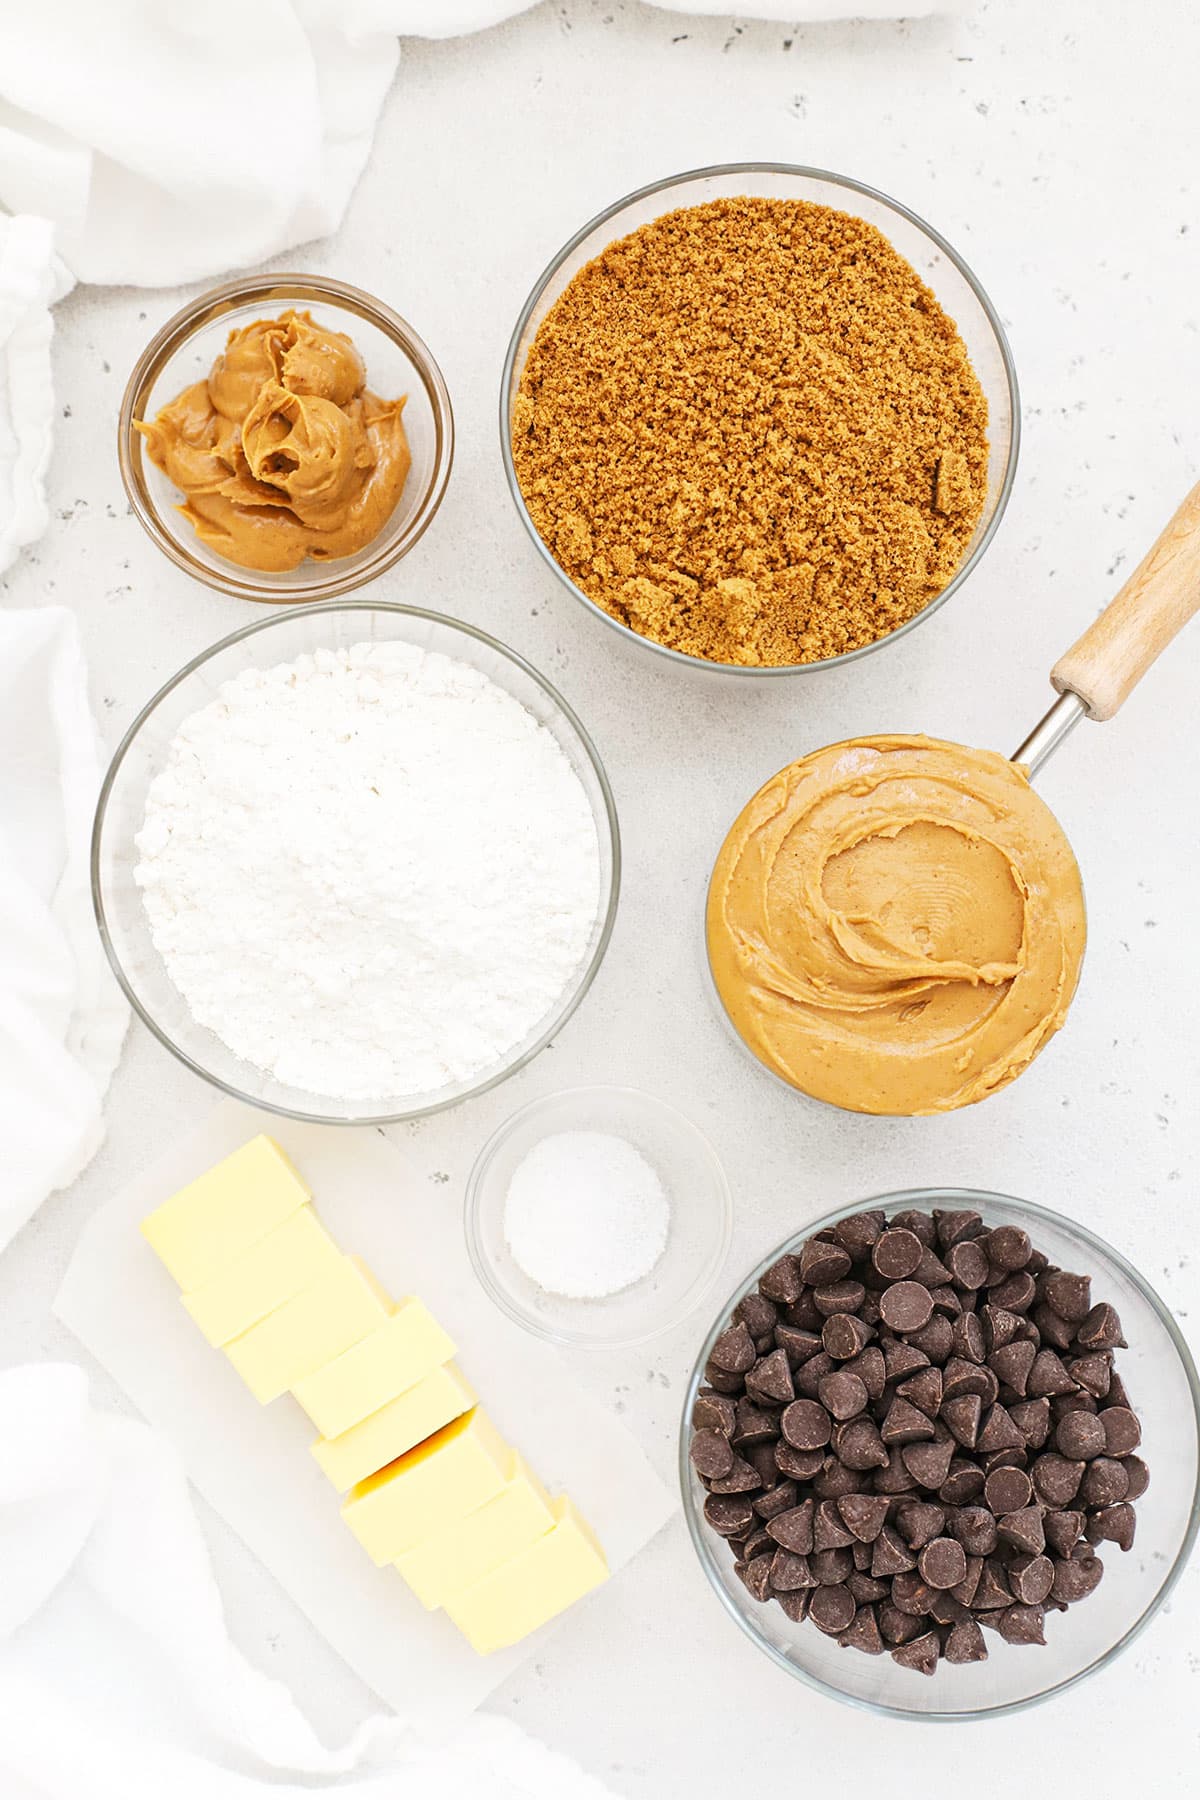 ingredients for gluten-free chocolate peanut butter bars